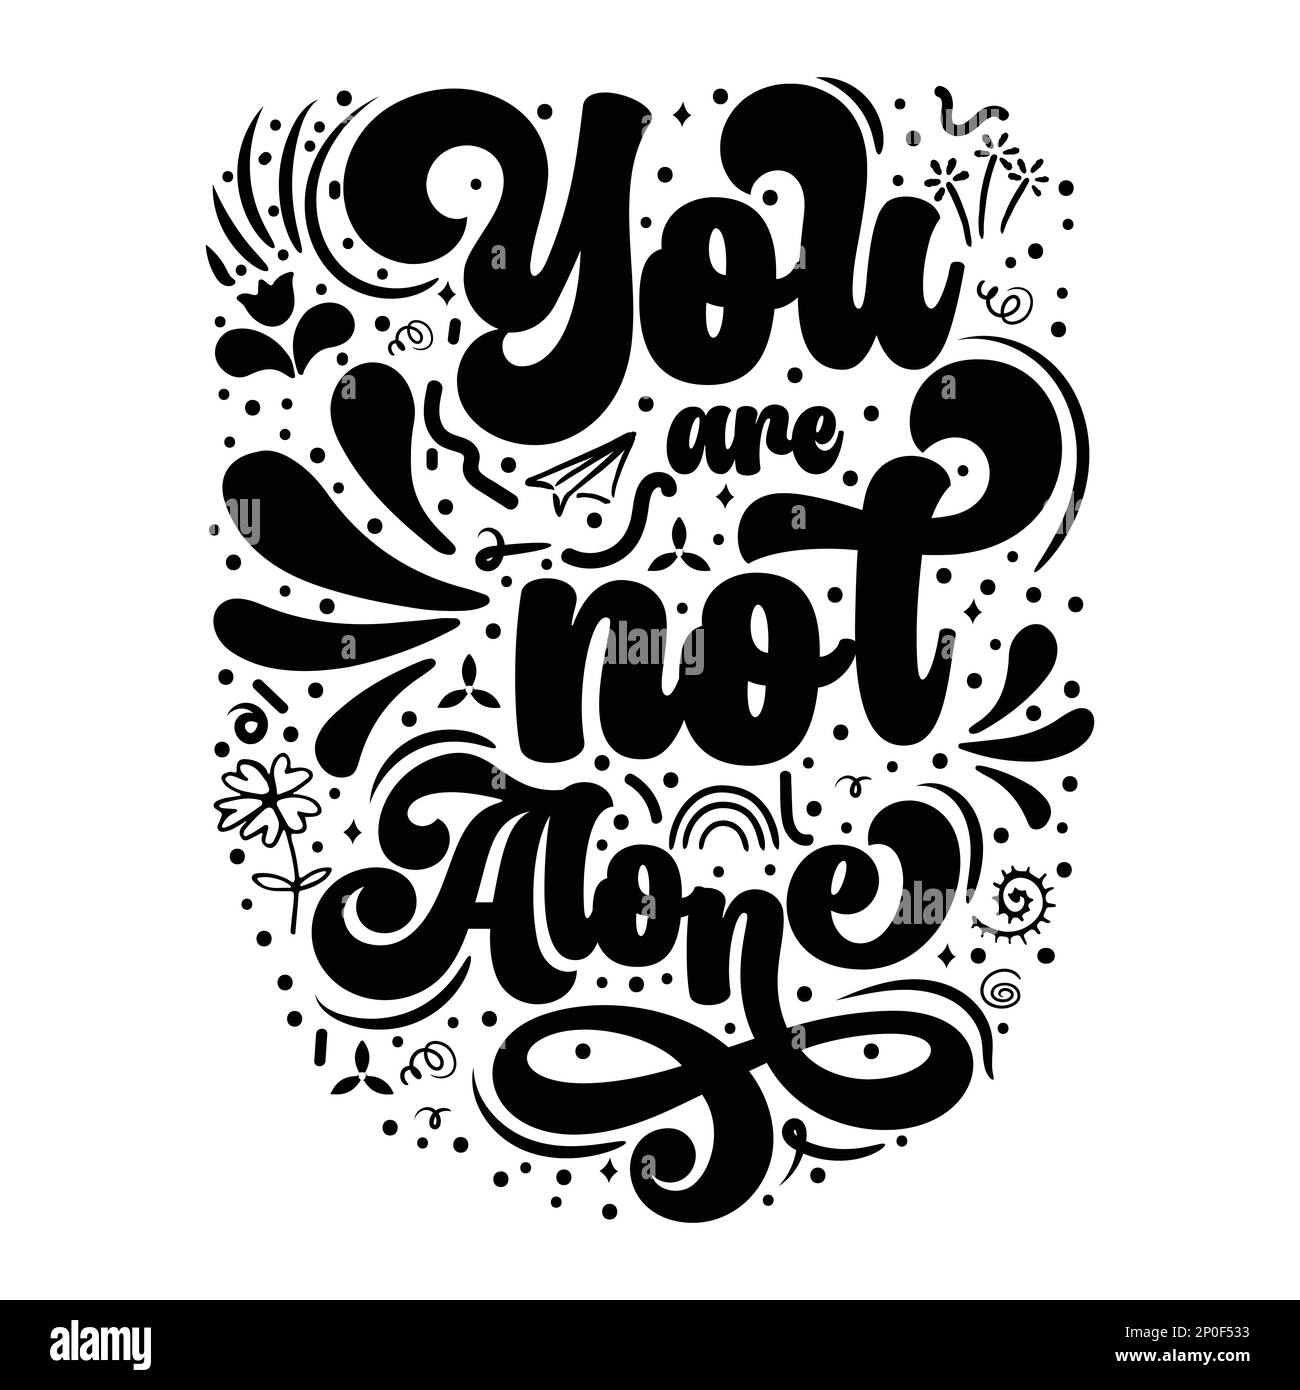 You are not alone Inspirational quote. Hand drawn vintage illustration with lettering and decoration elements. Drawing for prints on t-shirts and bags Stock Vector